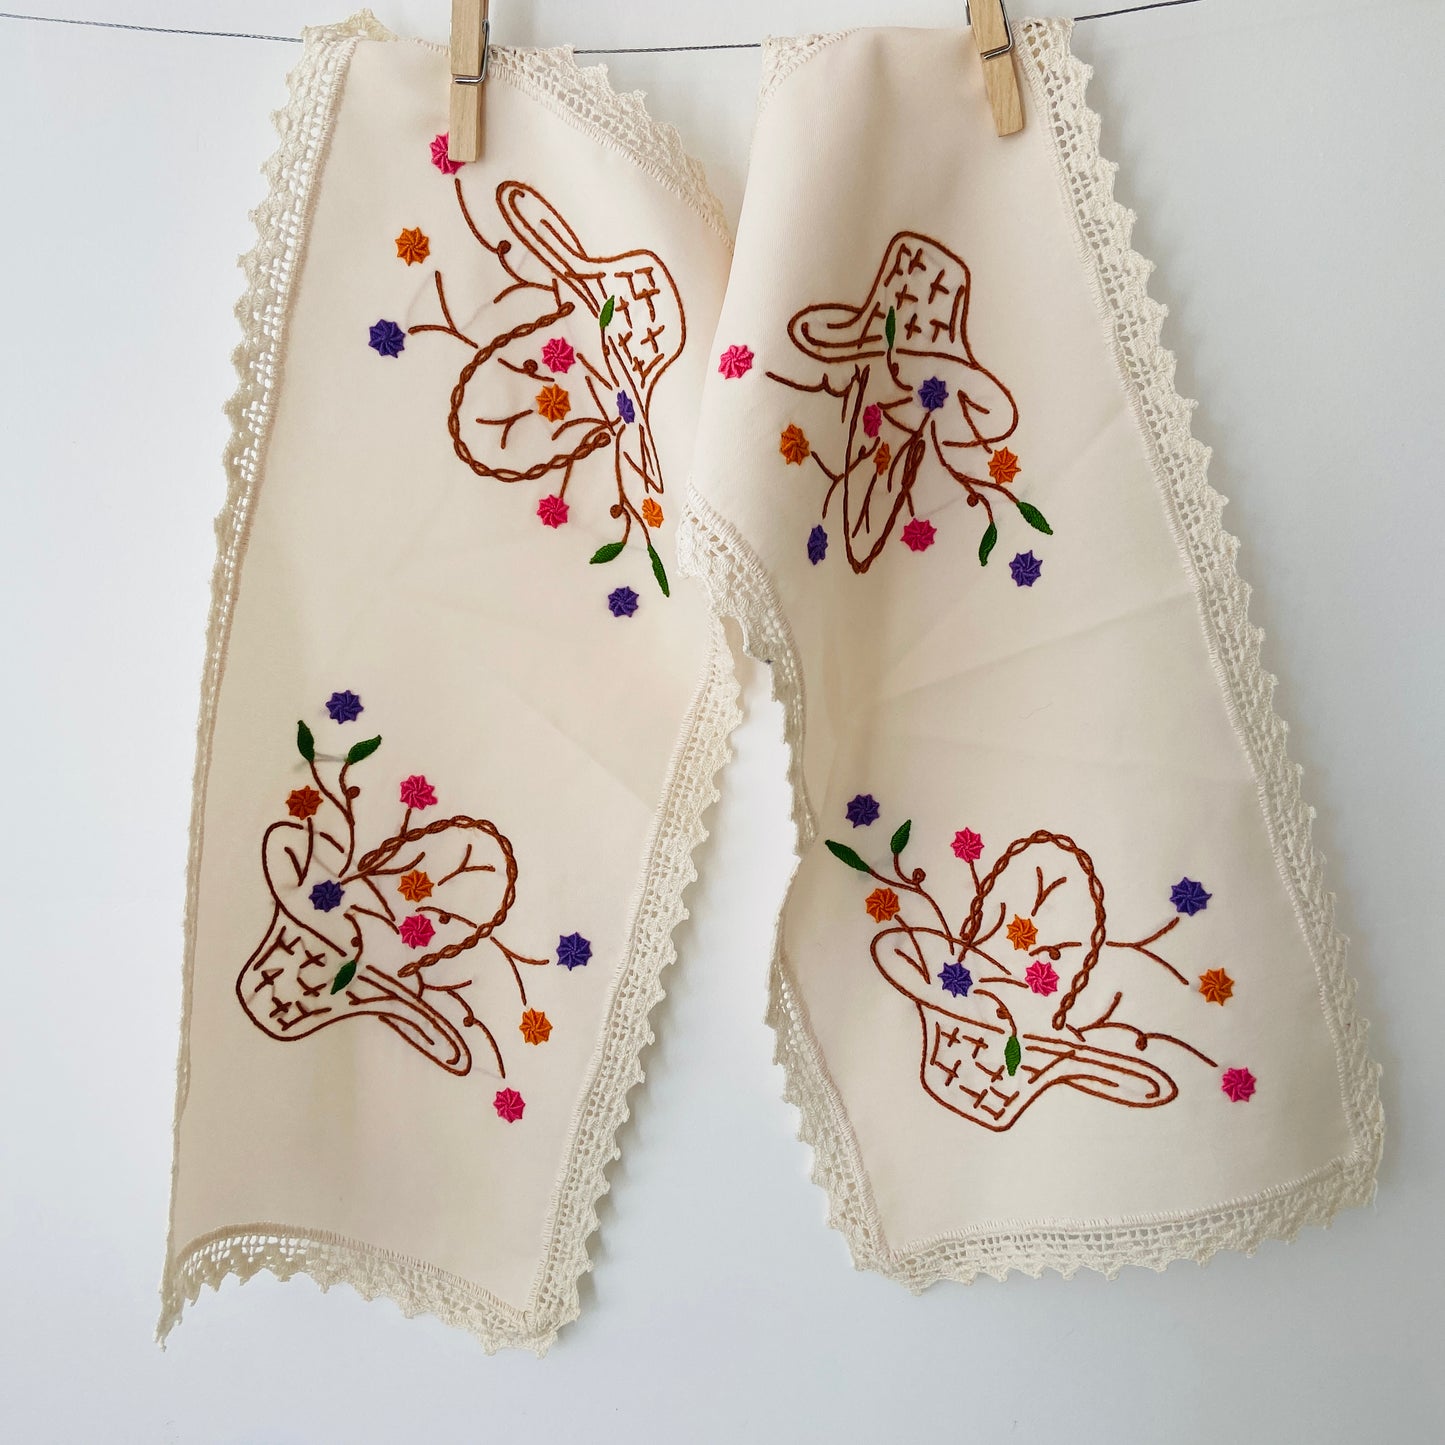 Pair of Embroidered Doilies Vintage Granny Decor